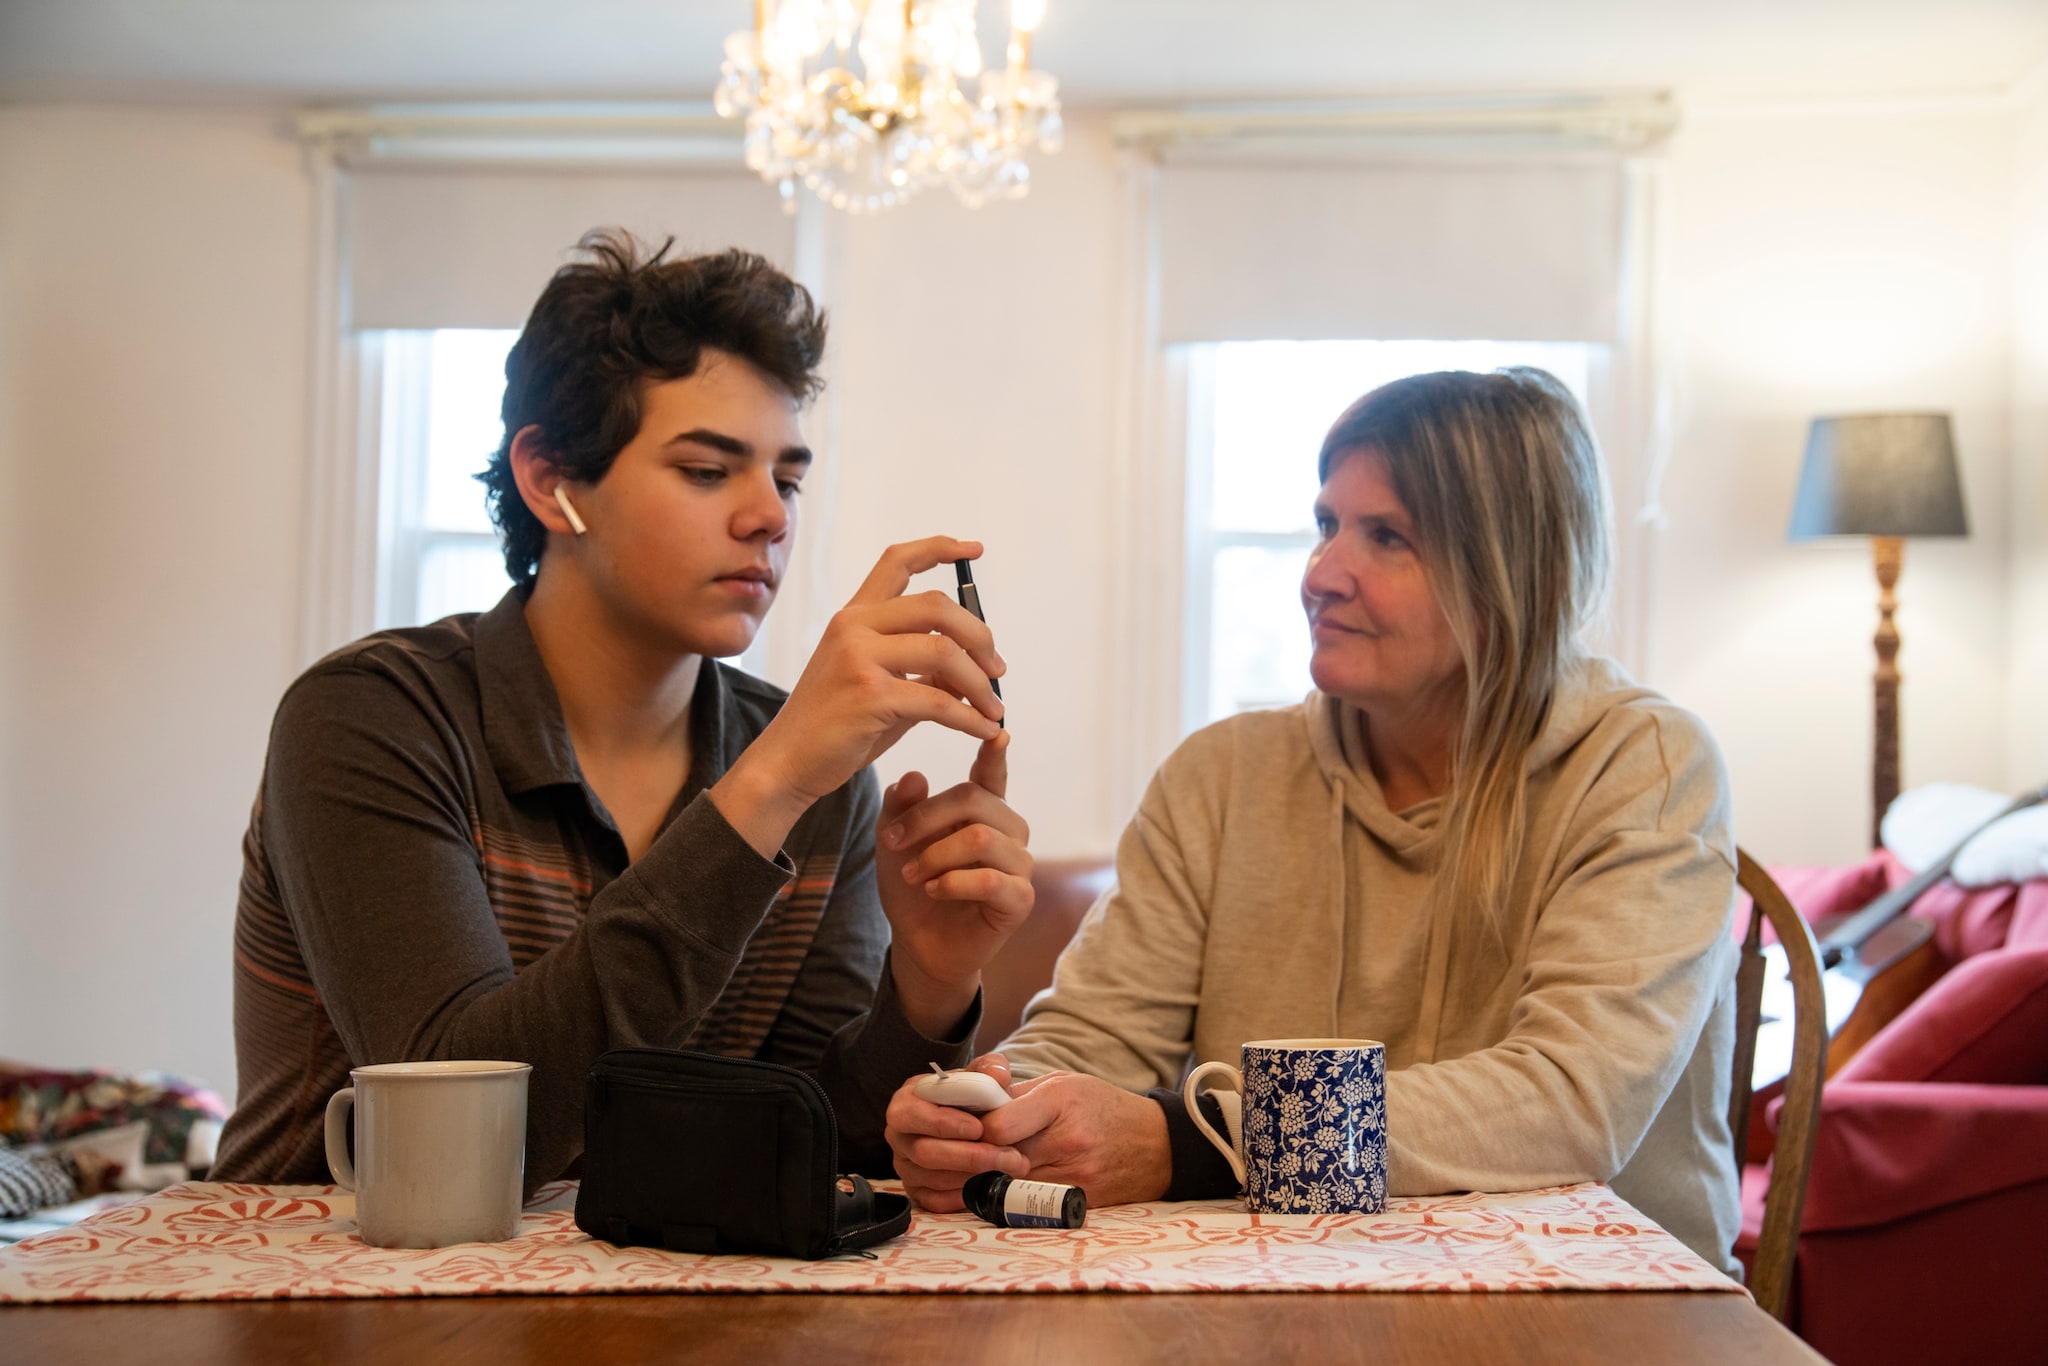 A diabetic teen patient at home with his mother.